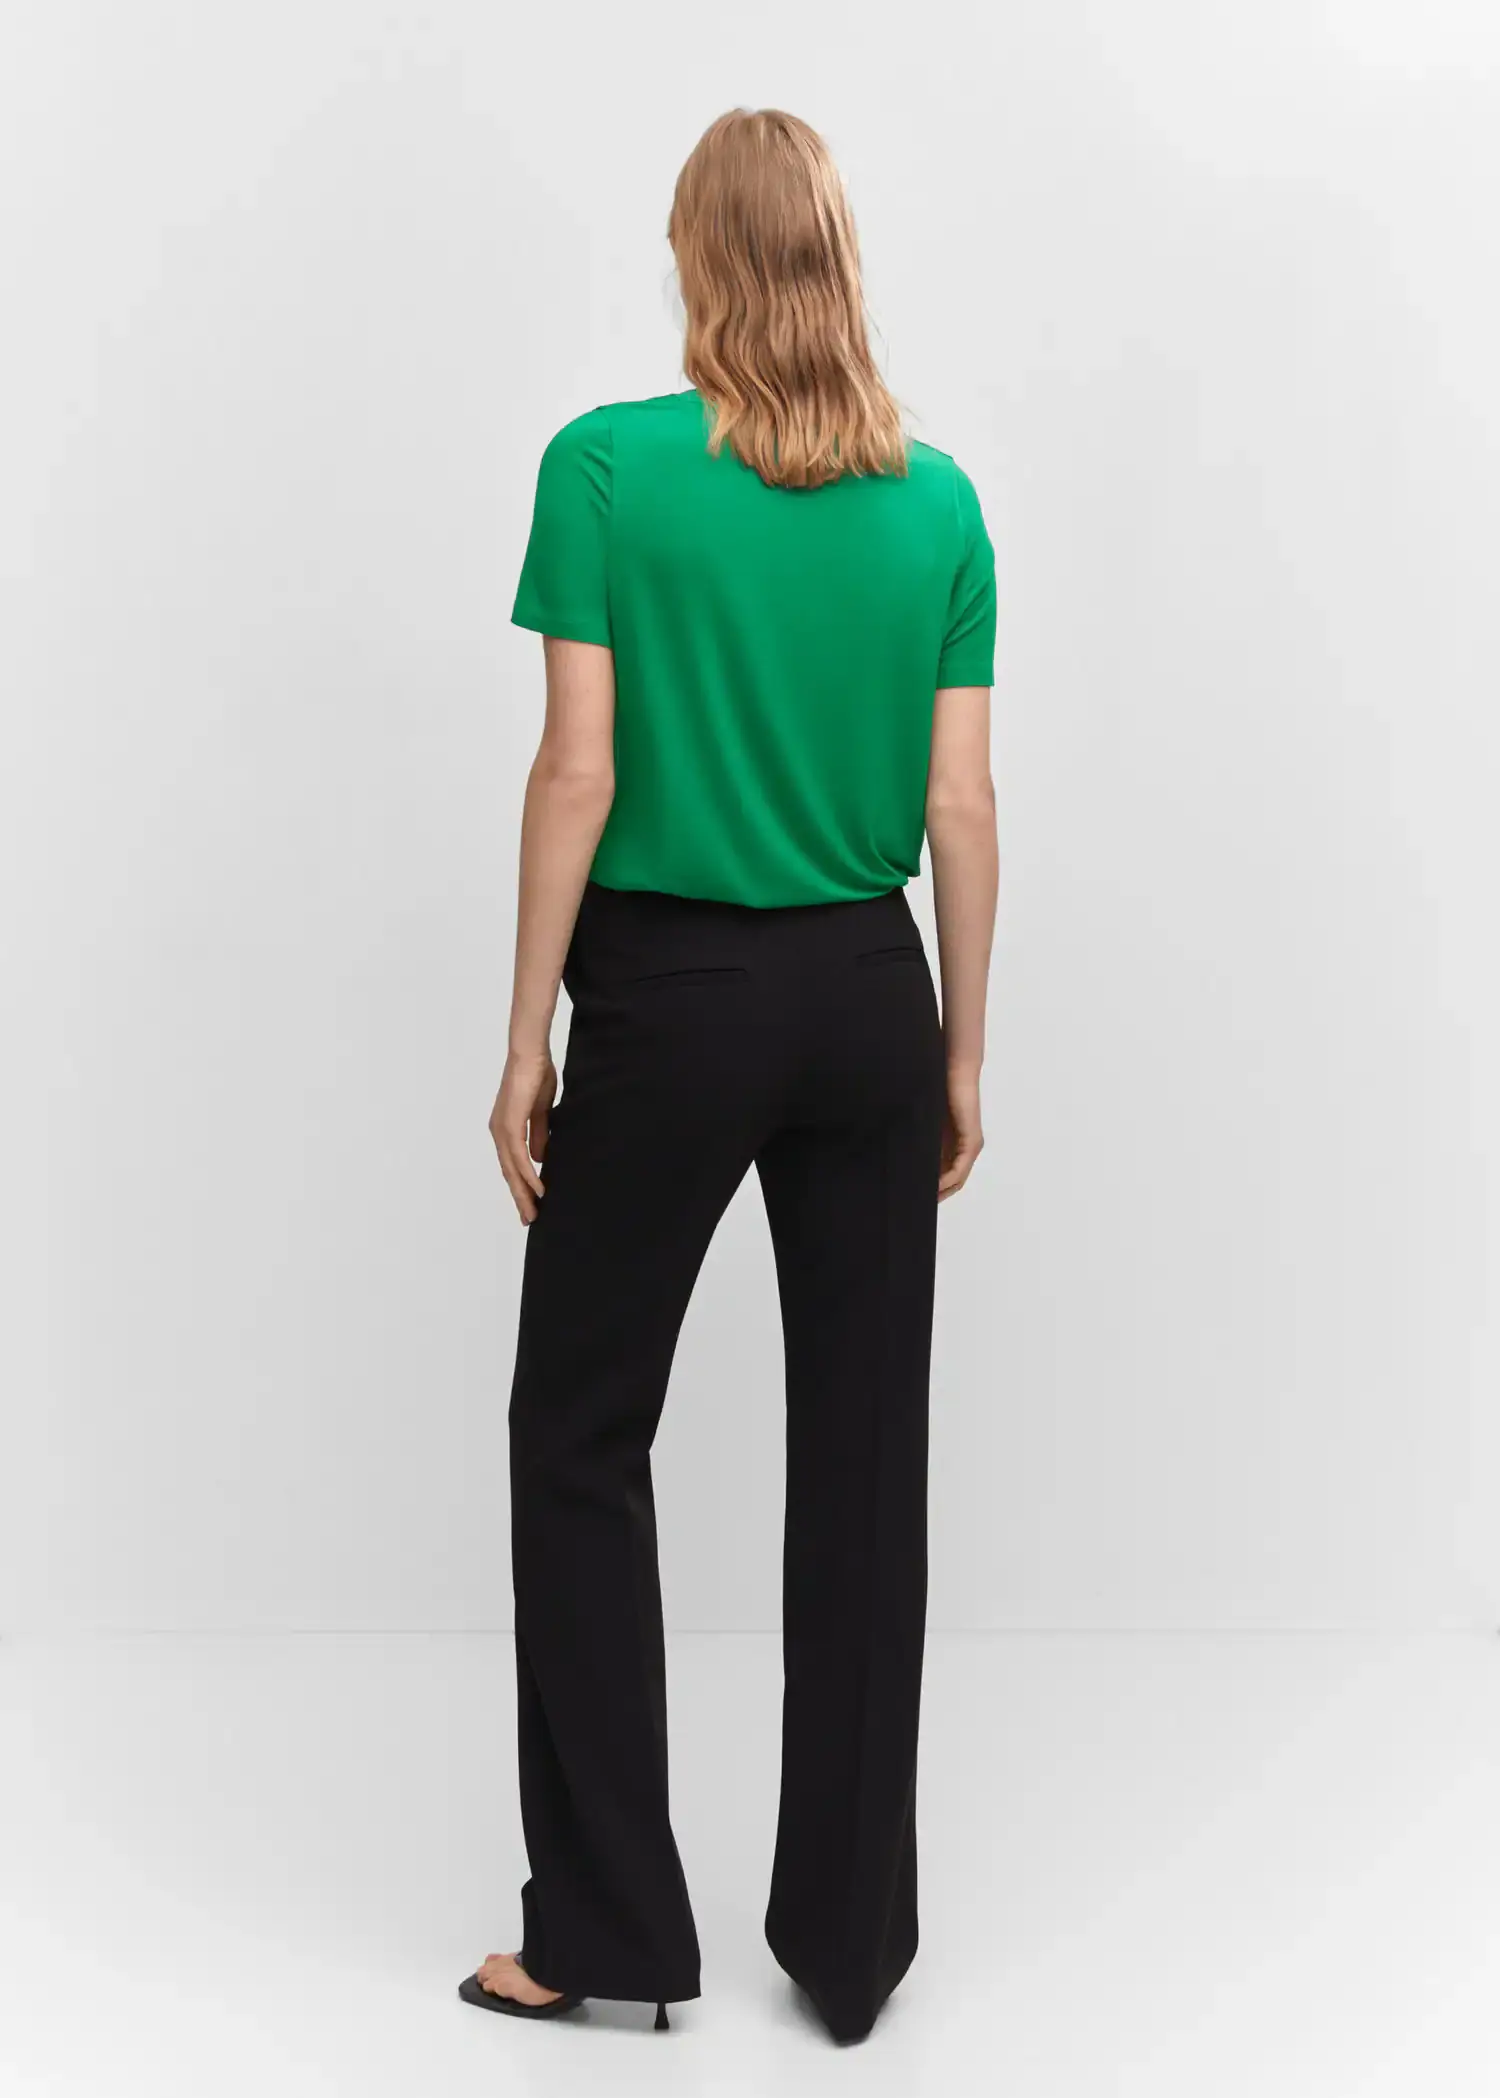 Mango Low neck t-shirt. a person wearing a green shirt and black pants. 